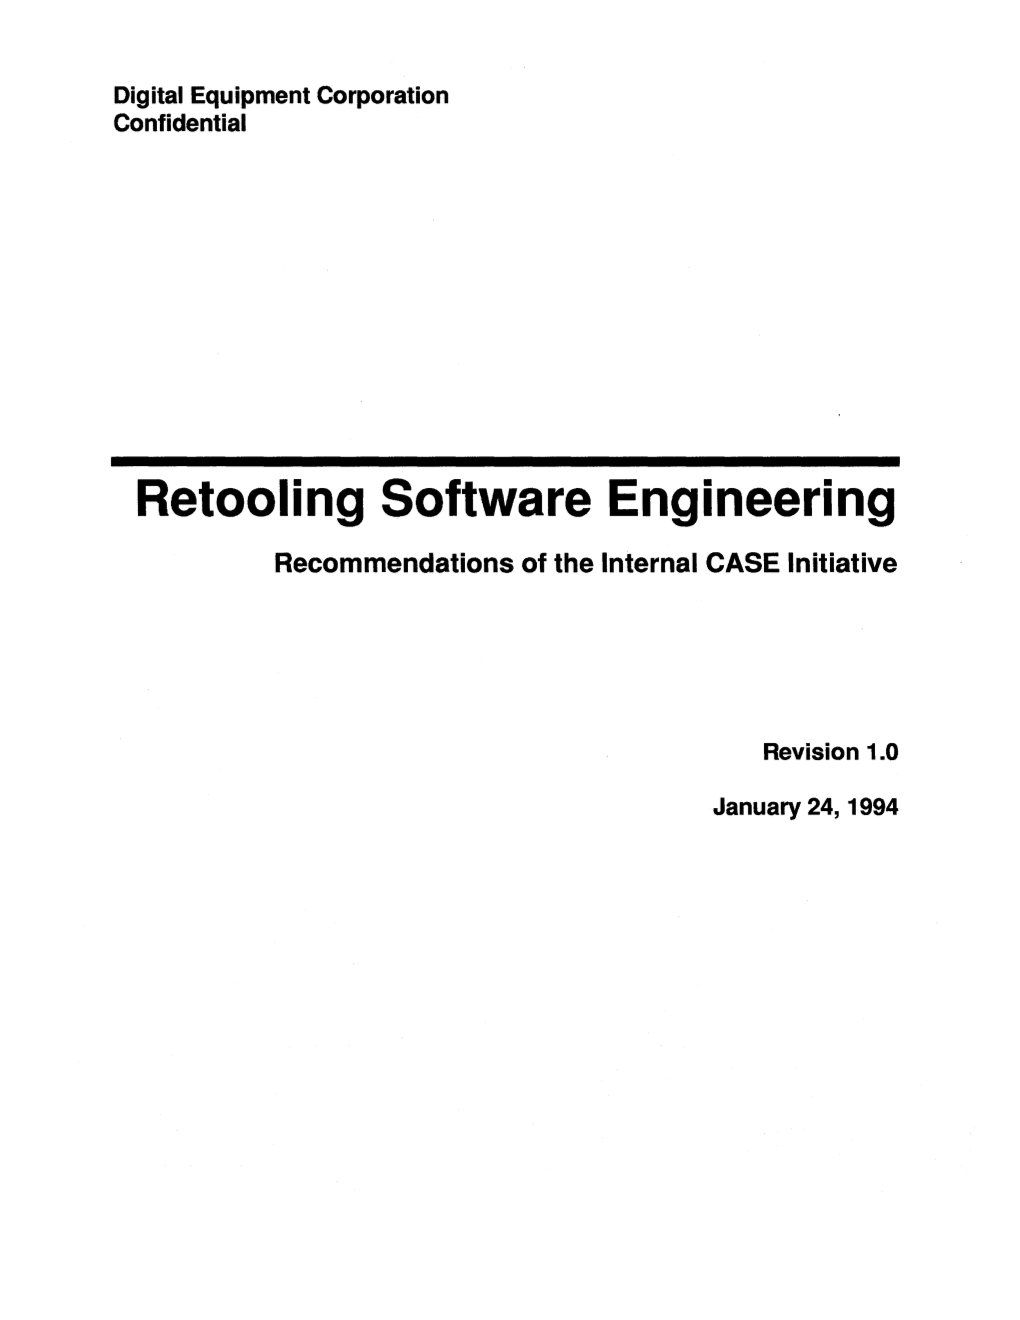 Retooling Software Engineering Recommendations of the Internal CASE Initiative